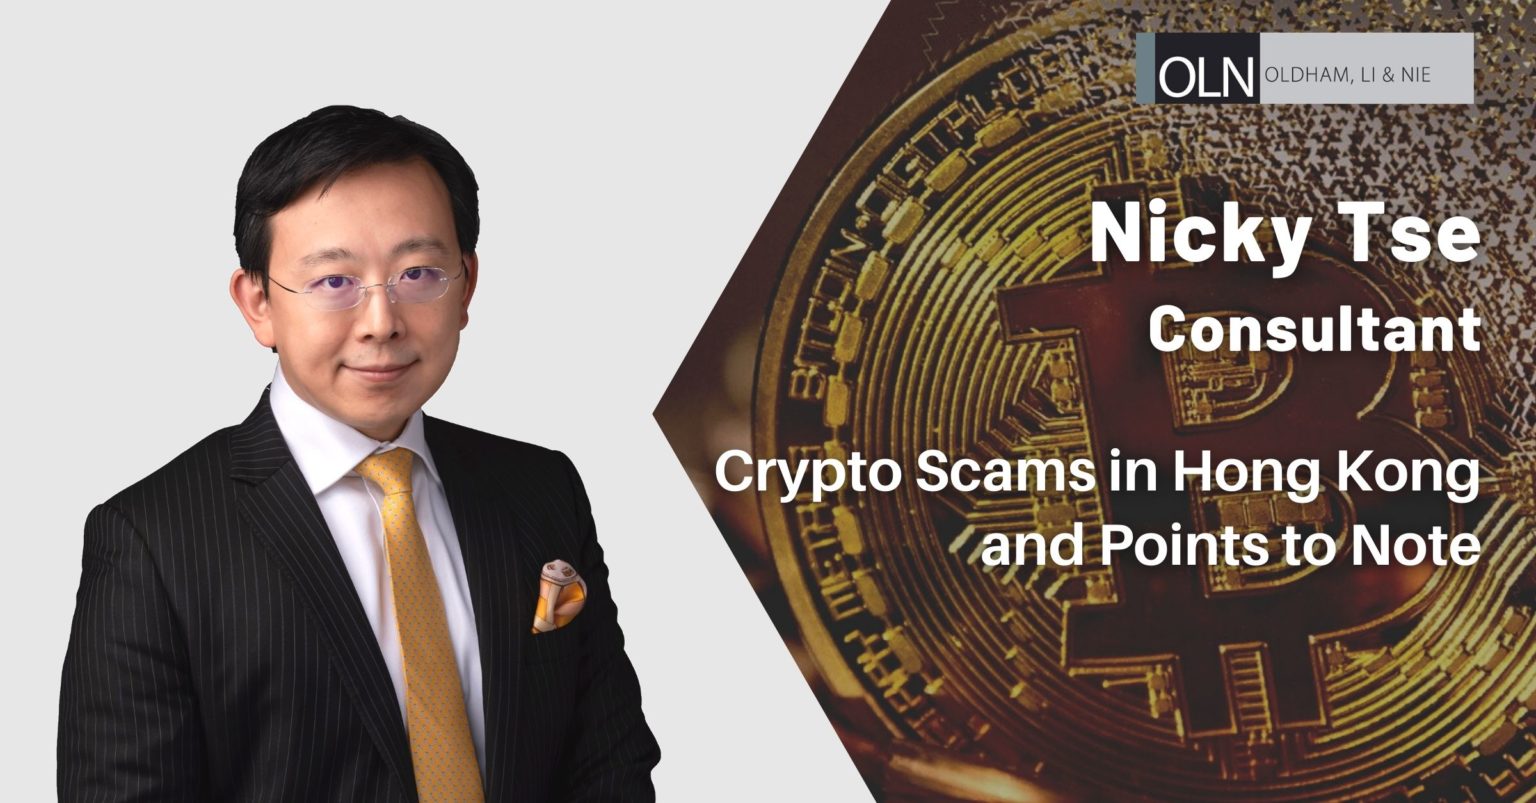 are there cryptocurrencies scam against americans from hong kong